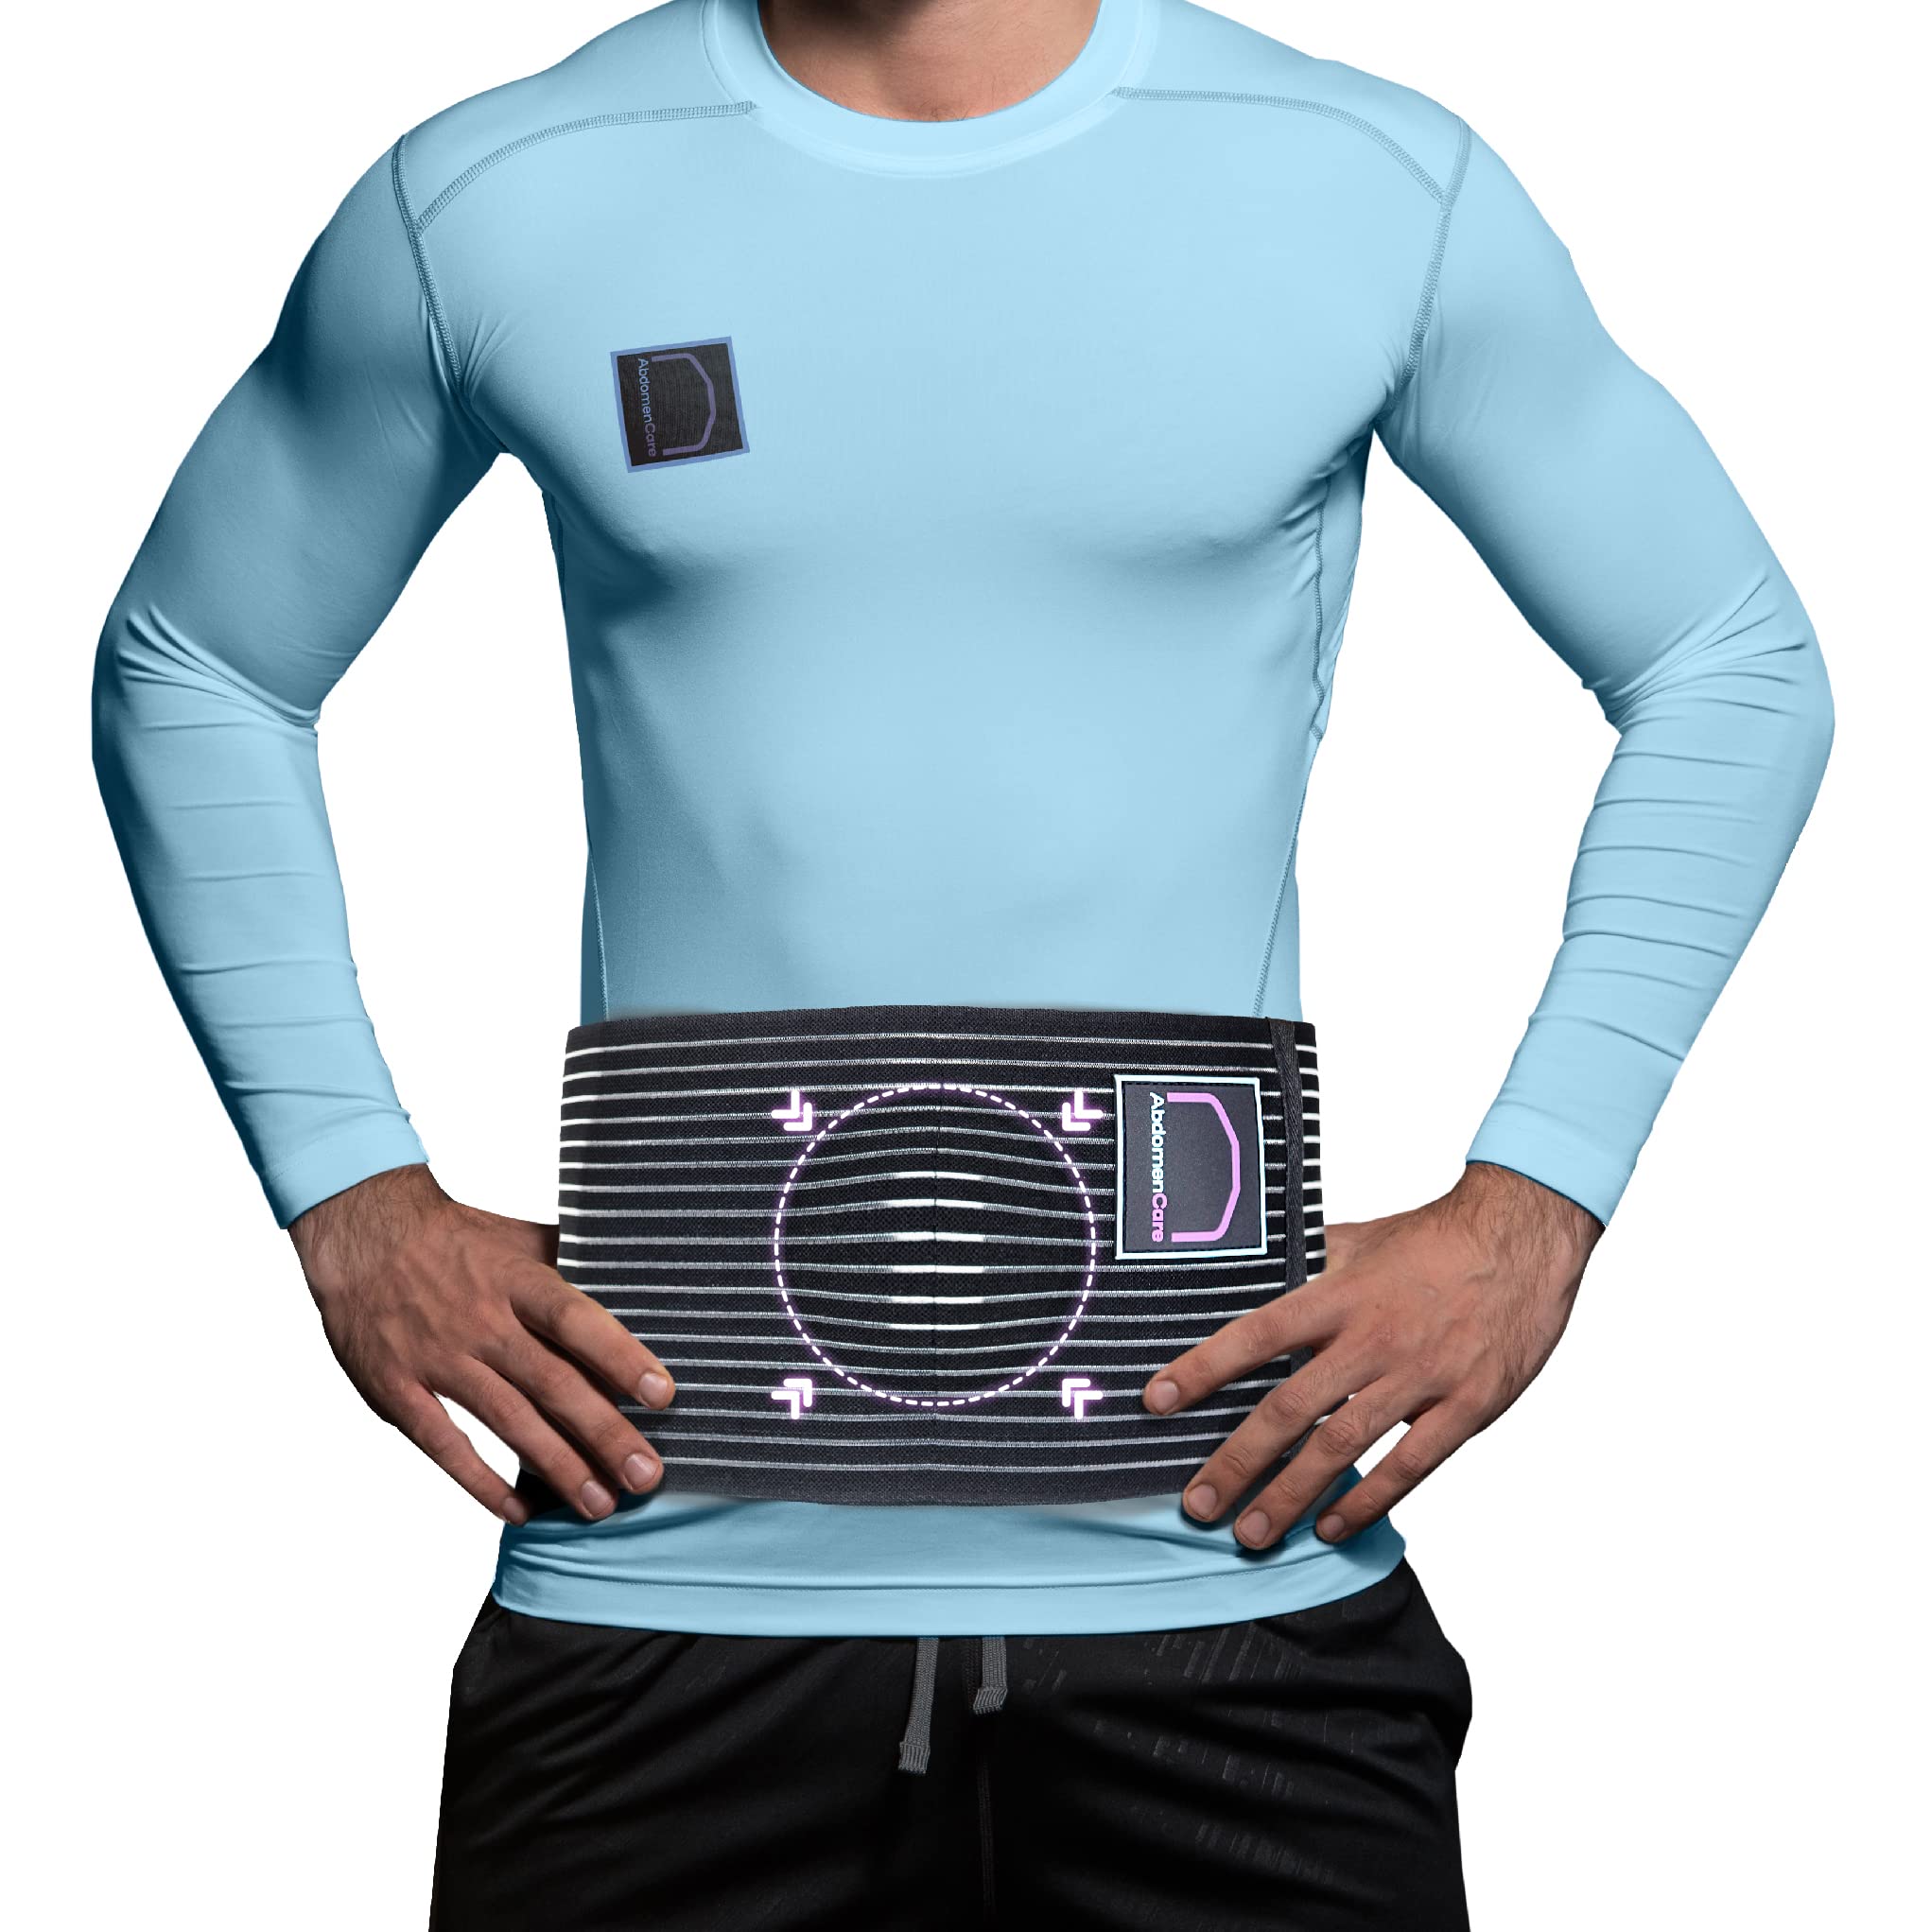 AbdomenCare Umbilical Hernia Belt, Abdominal Hernia Belt for Men & Women, Belly Button Umbilical Hernia Binder w/ 2 Hernia Compression Pads, Ventral, Epigastric & Post Surgery Support Belts